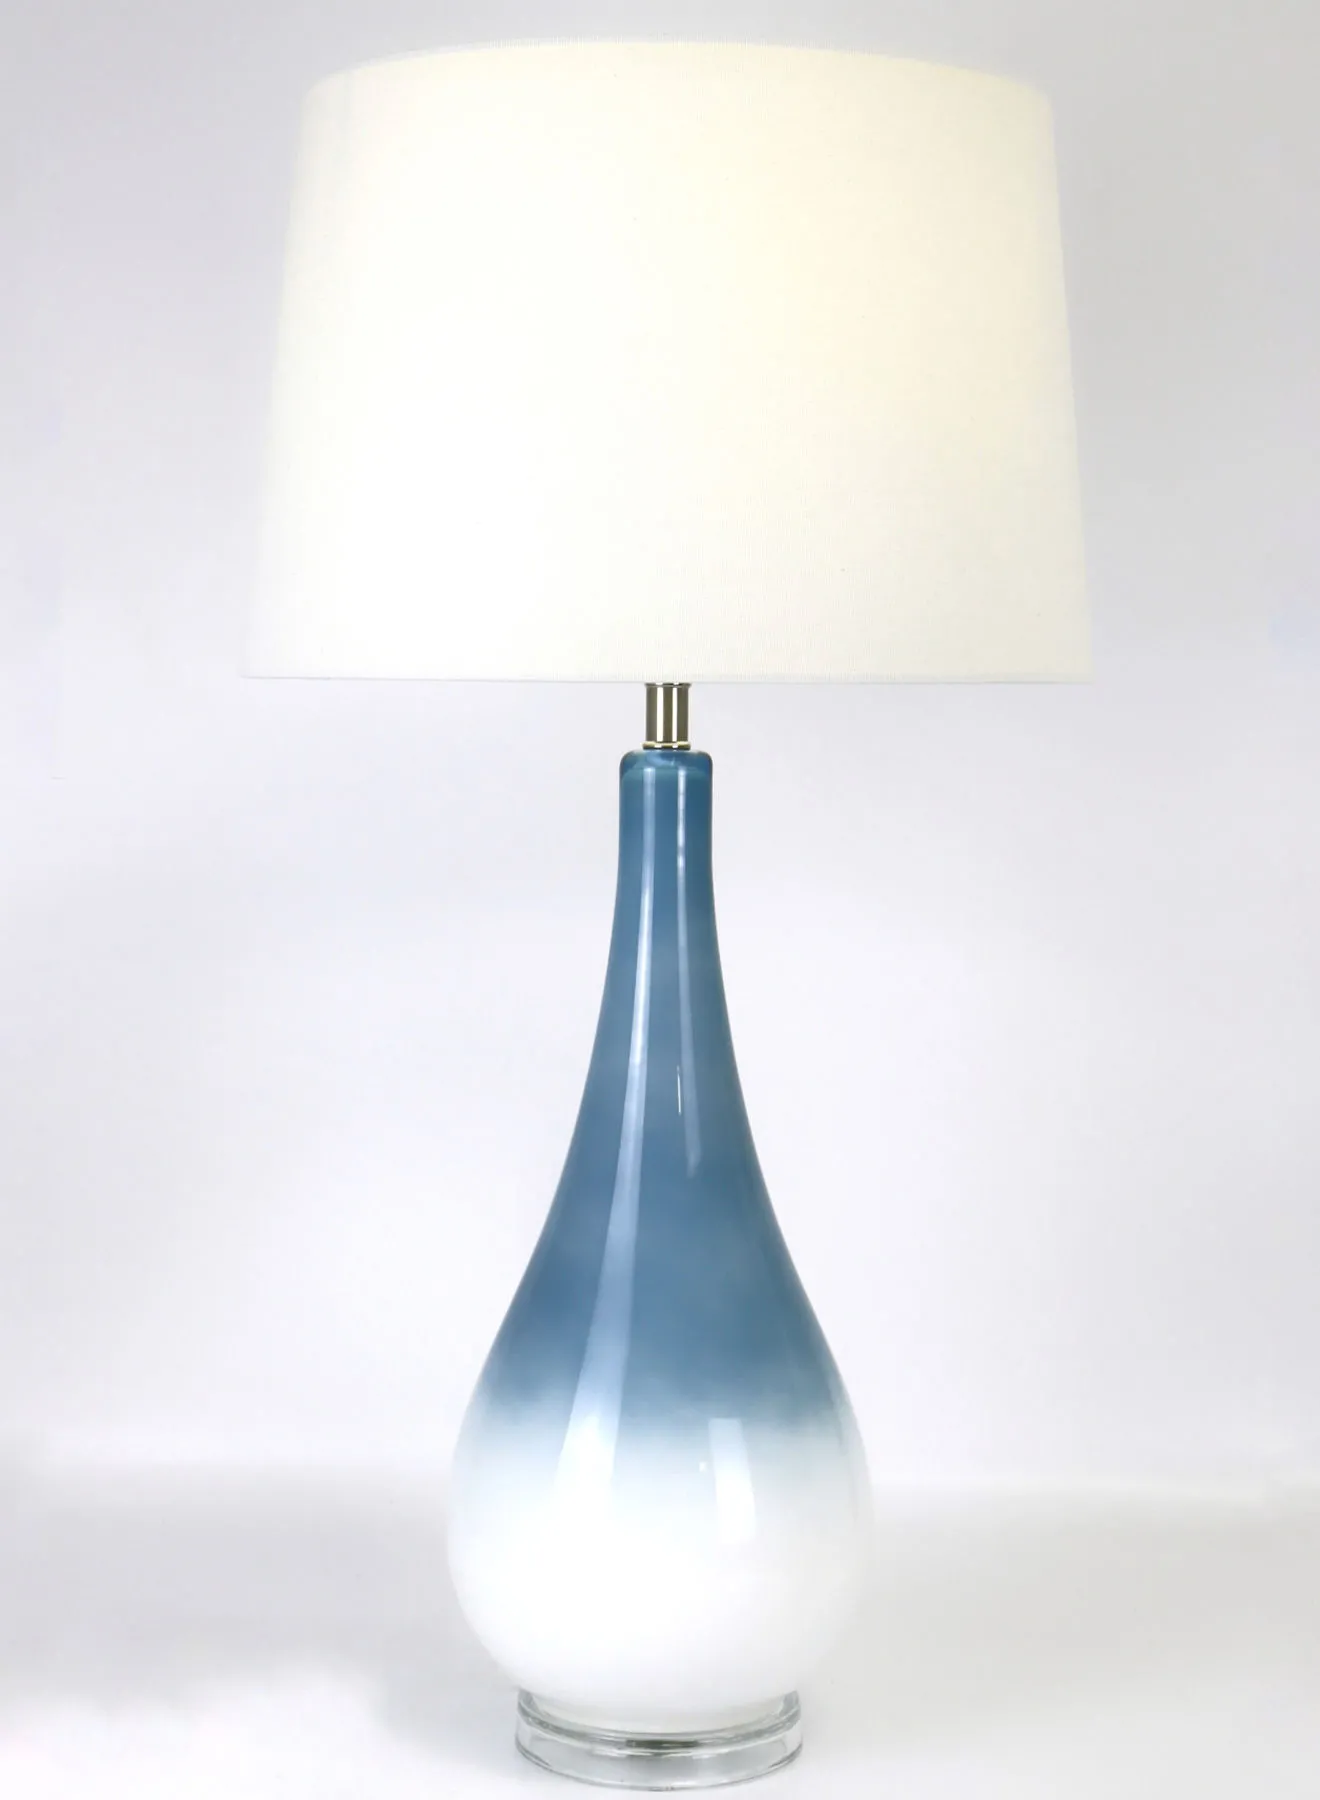 ebb & flow Modern Design Glass Table Lamp Unique Luxury Quality Material for the Perfect Stylish Home RSN71021 Blue/White 15 x 28.5